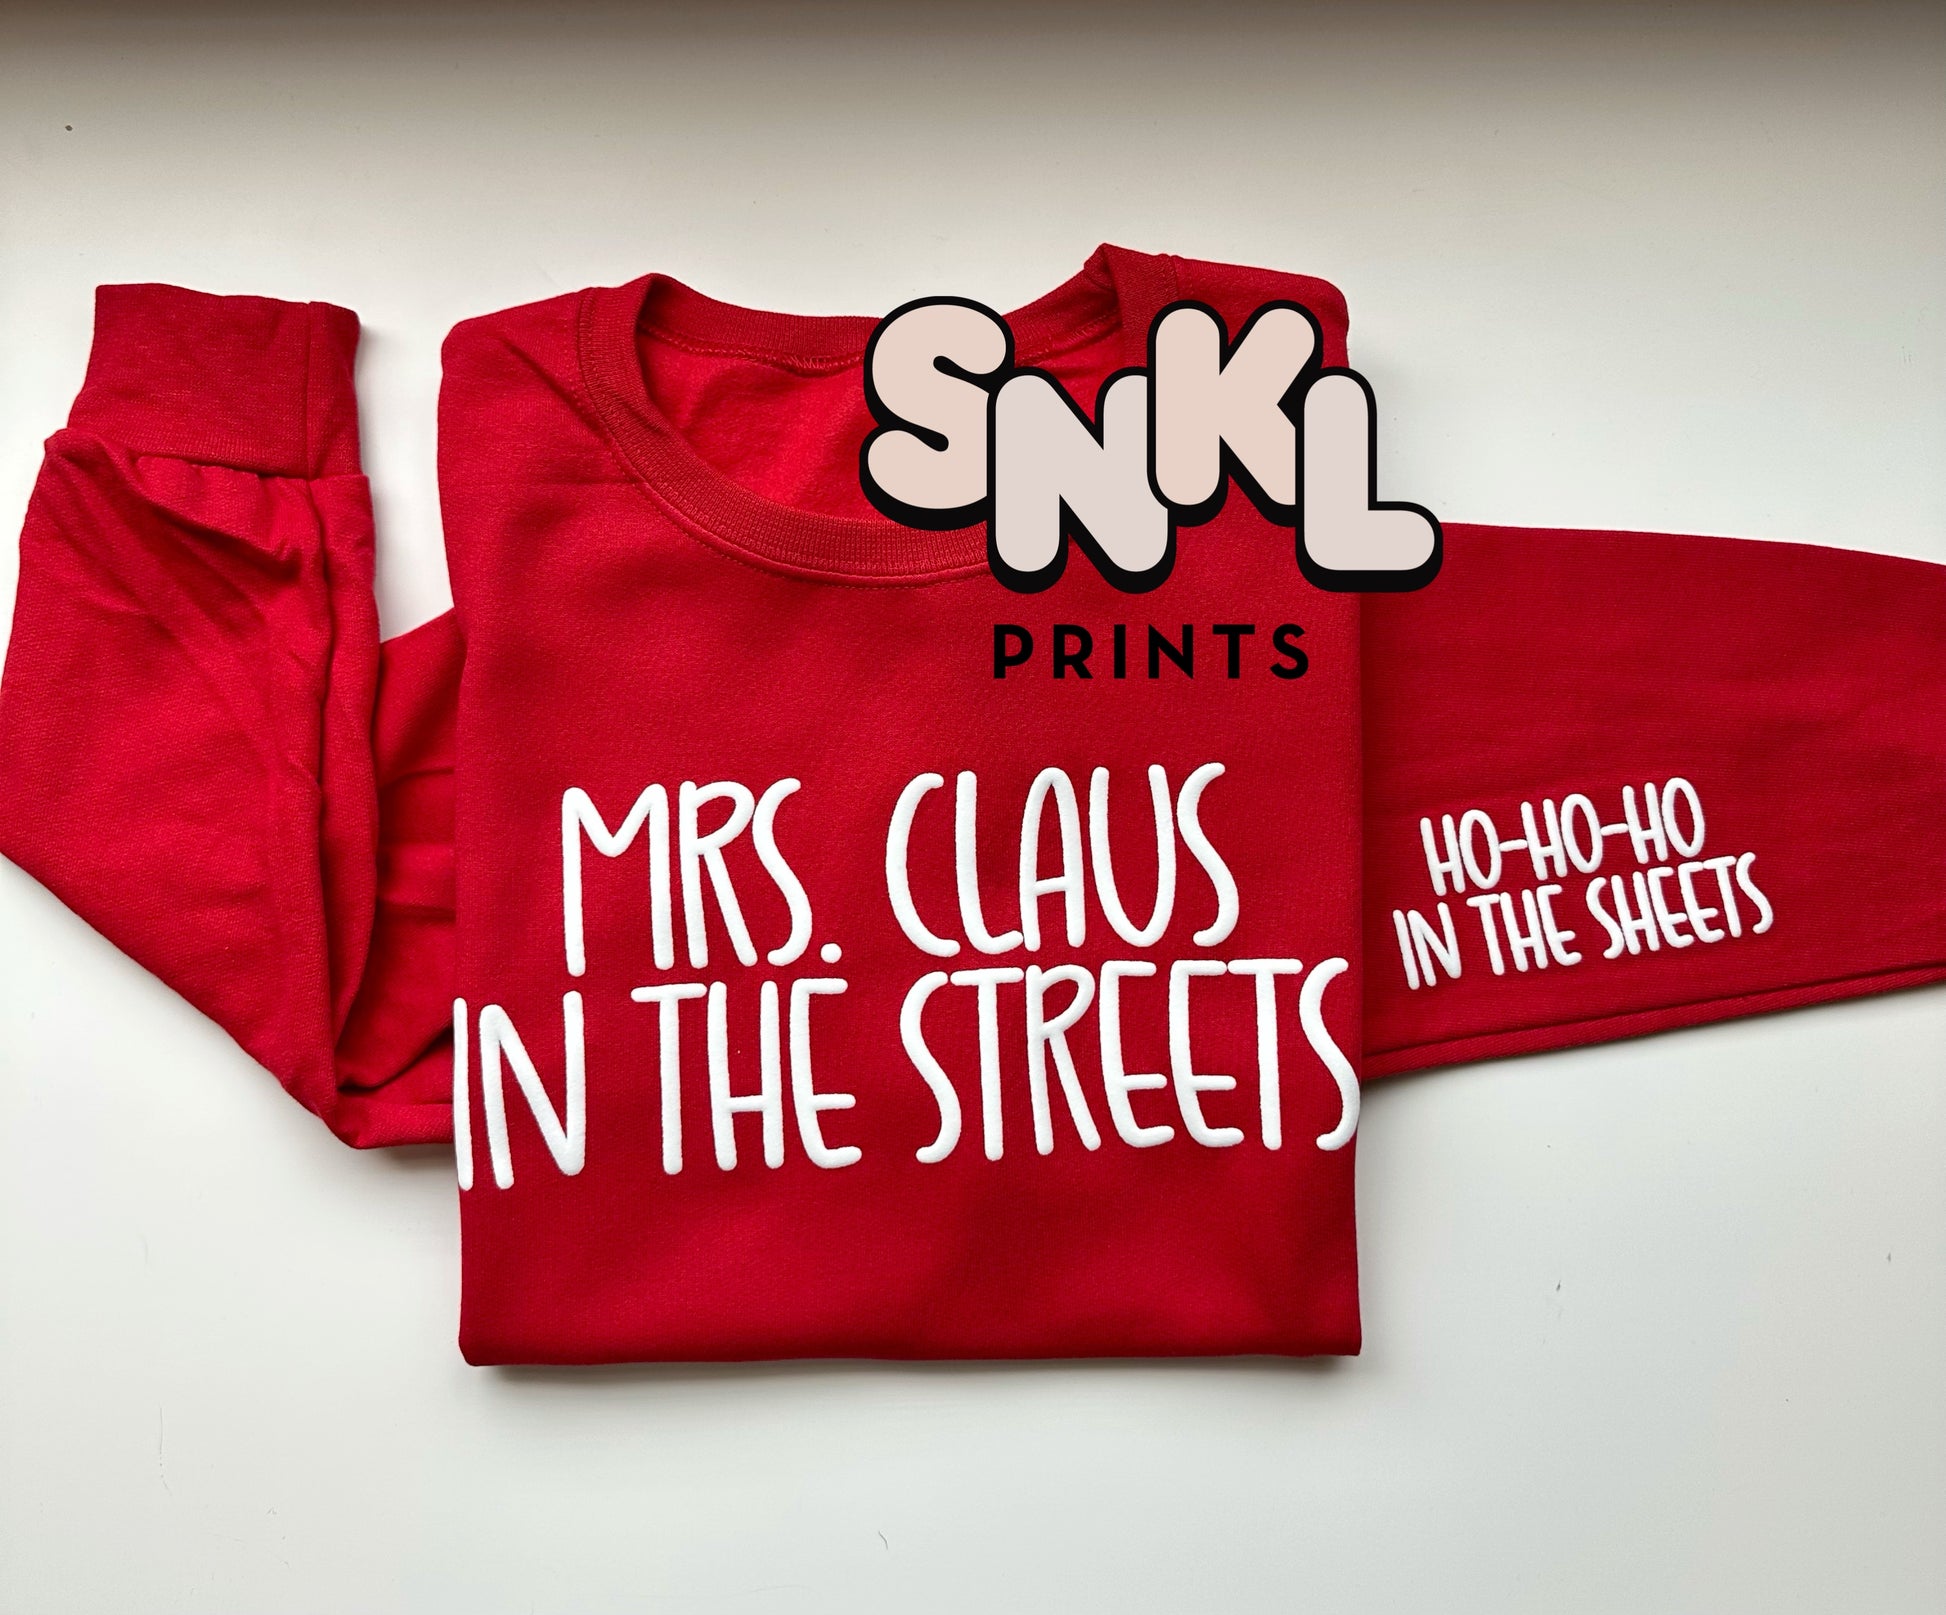 Mrs. Claus in the Streets Puff Print Sweatshirt - SNKL Prints